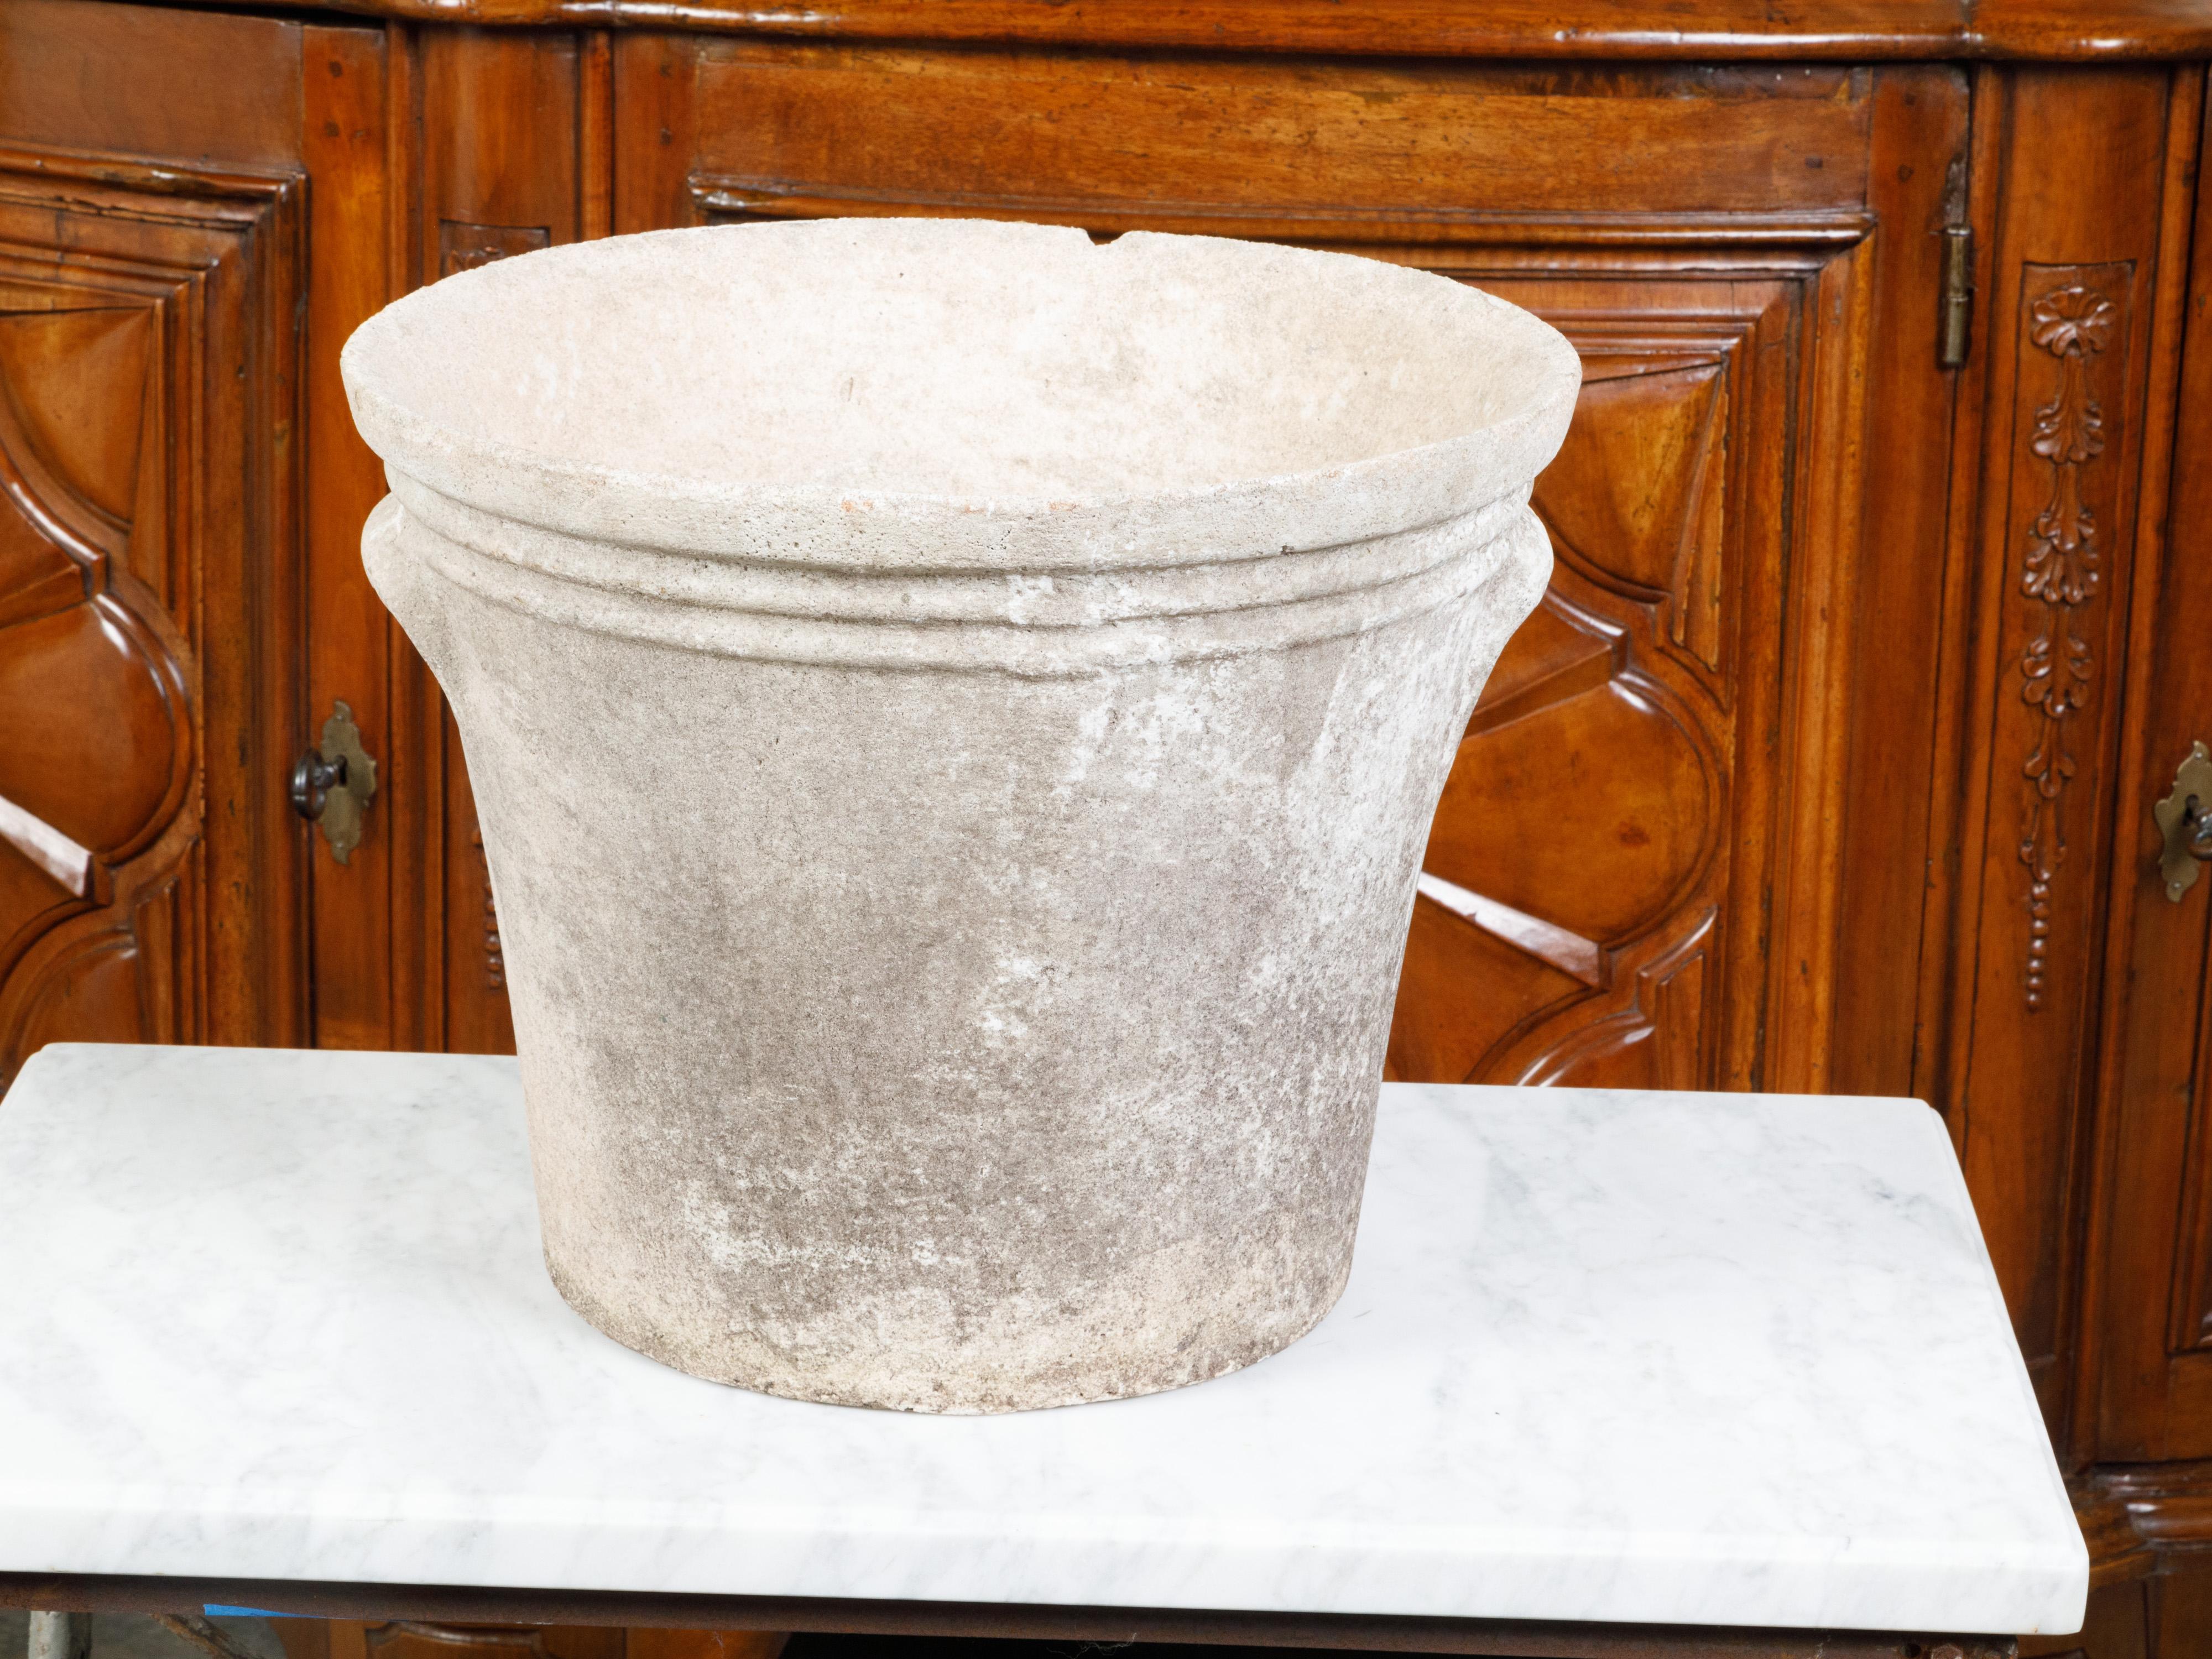 A vintage French planter from the mid 20th century, with decorative handles and patina. Created in France during the Midcentury period, this planter features a circular tapering body (the base measuring 11.5